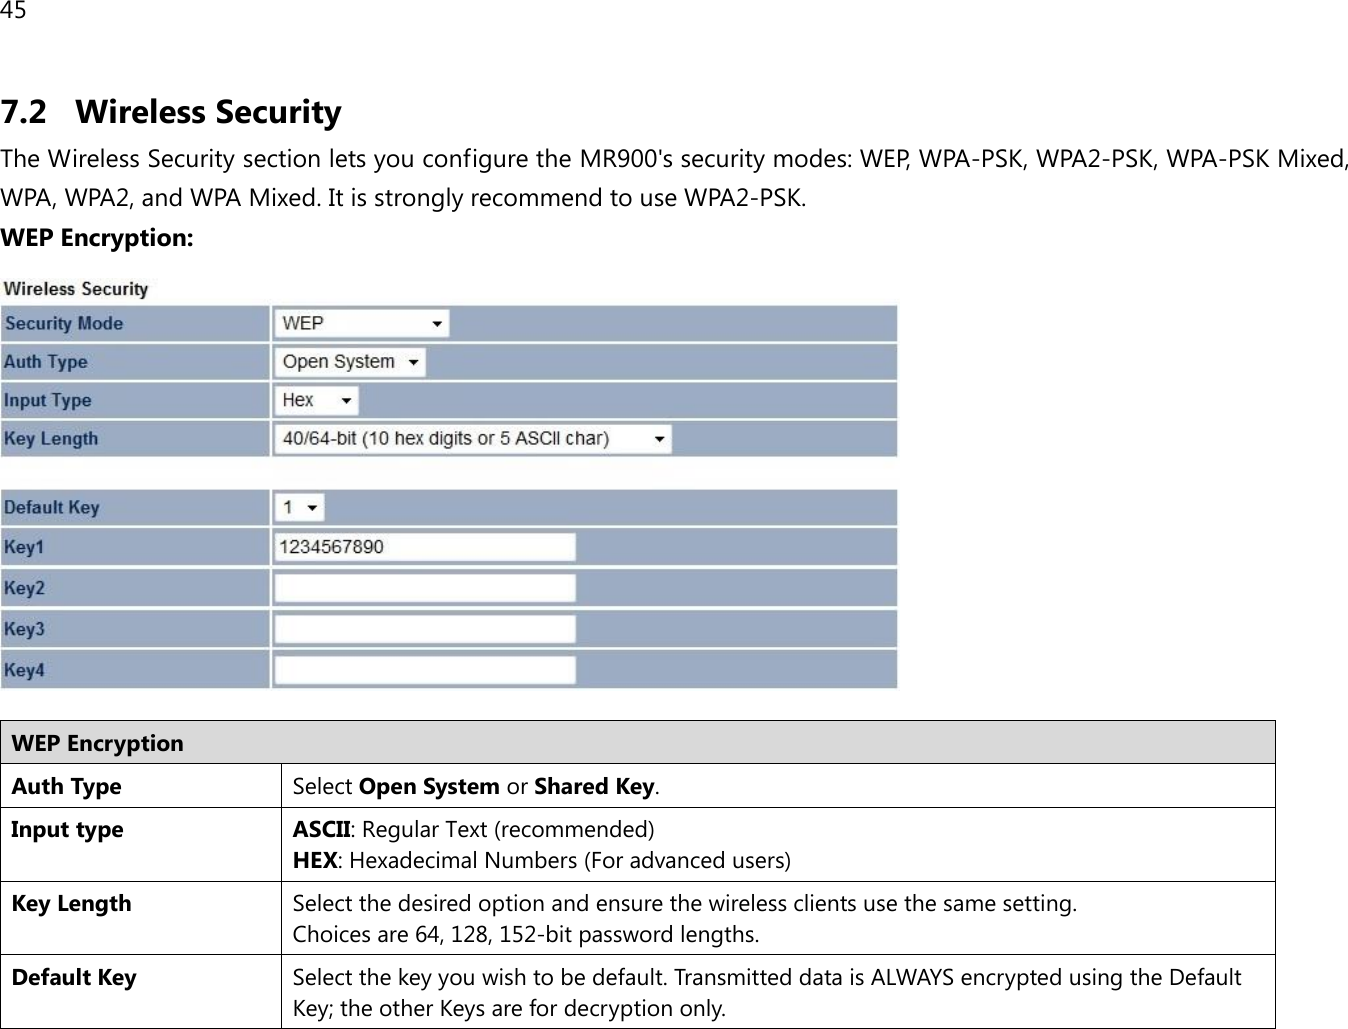 45 7.2 Wireless Security The Wireless Security section lets you configure the MR900&apos;s security modes: WEP, WPA-PSK, WPA2-PSK, WPA-PSK Mixed, WPA, WPA2, and WPA Mixed. It is strongly recommend to use WPA2-PSK.  WEP Encryption:   WEP Encryption Auth Type Select Open System or Shared Key. Input type ASCII: Regular Text (recommended) HEX: Hexadecimal Numbers (For advanced users) Key Length Select the desired option and ensure the wireless clients use the same setting. Choices are 64, 128, 152-bit password lengths. Default Key Select the key you wish to be default. Transmitted data is ALWAYS encrypted using the Default Key; the other Keys are for decryption only.  